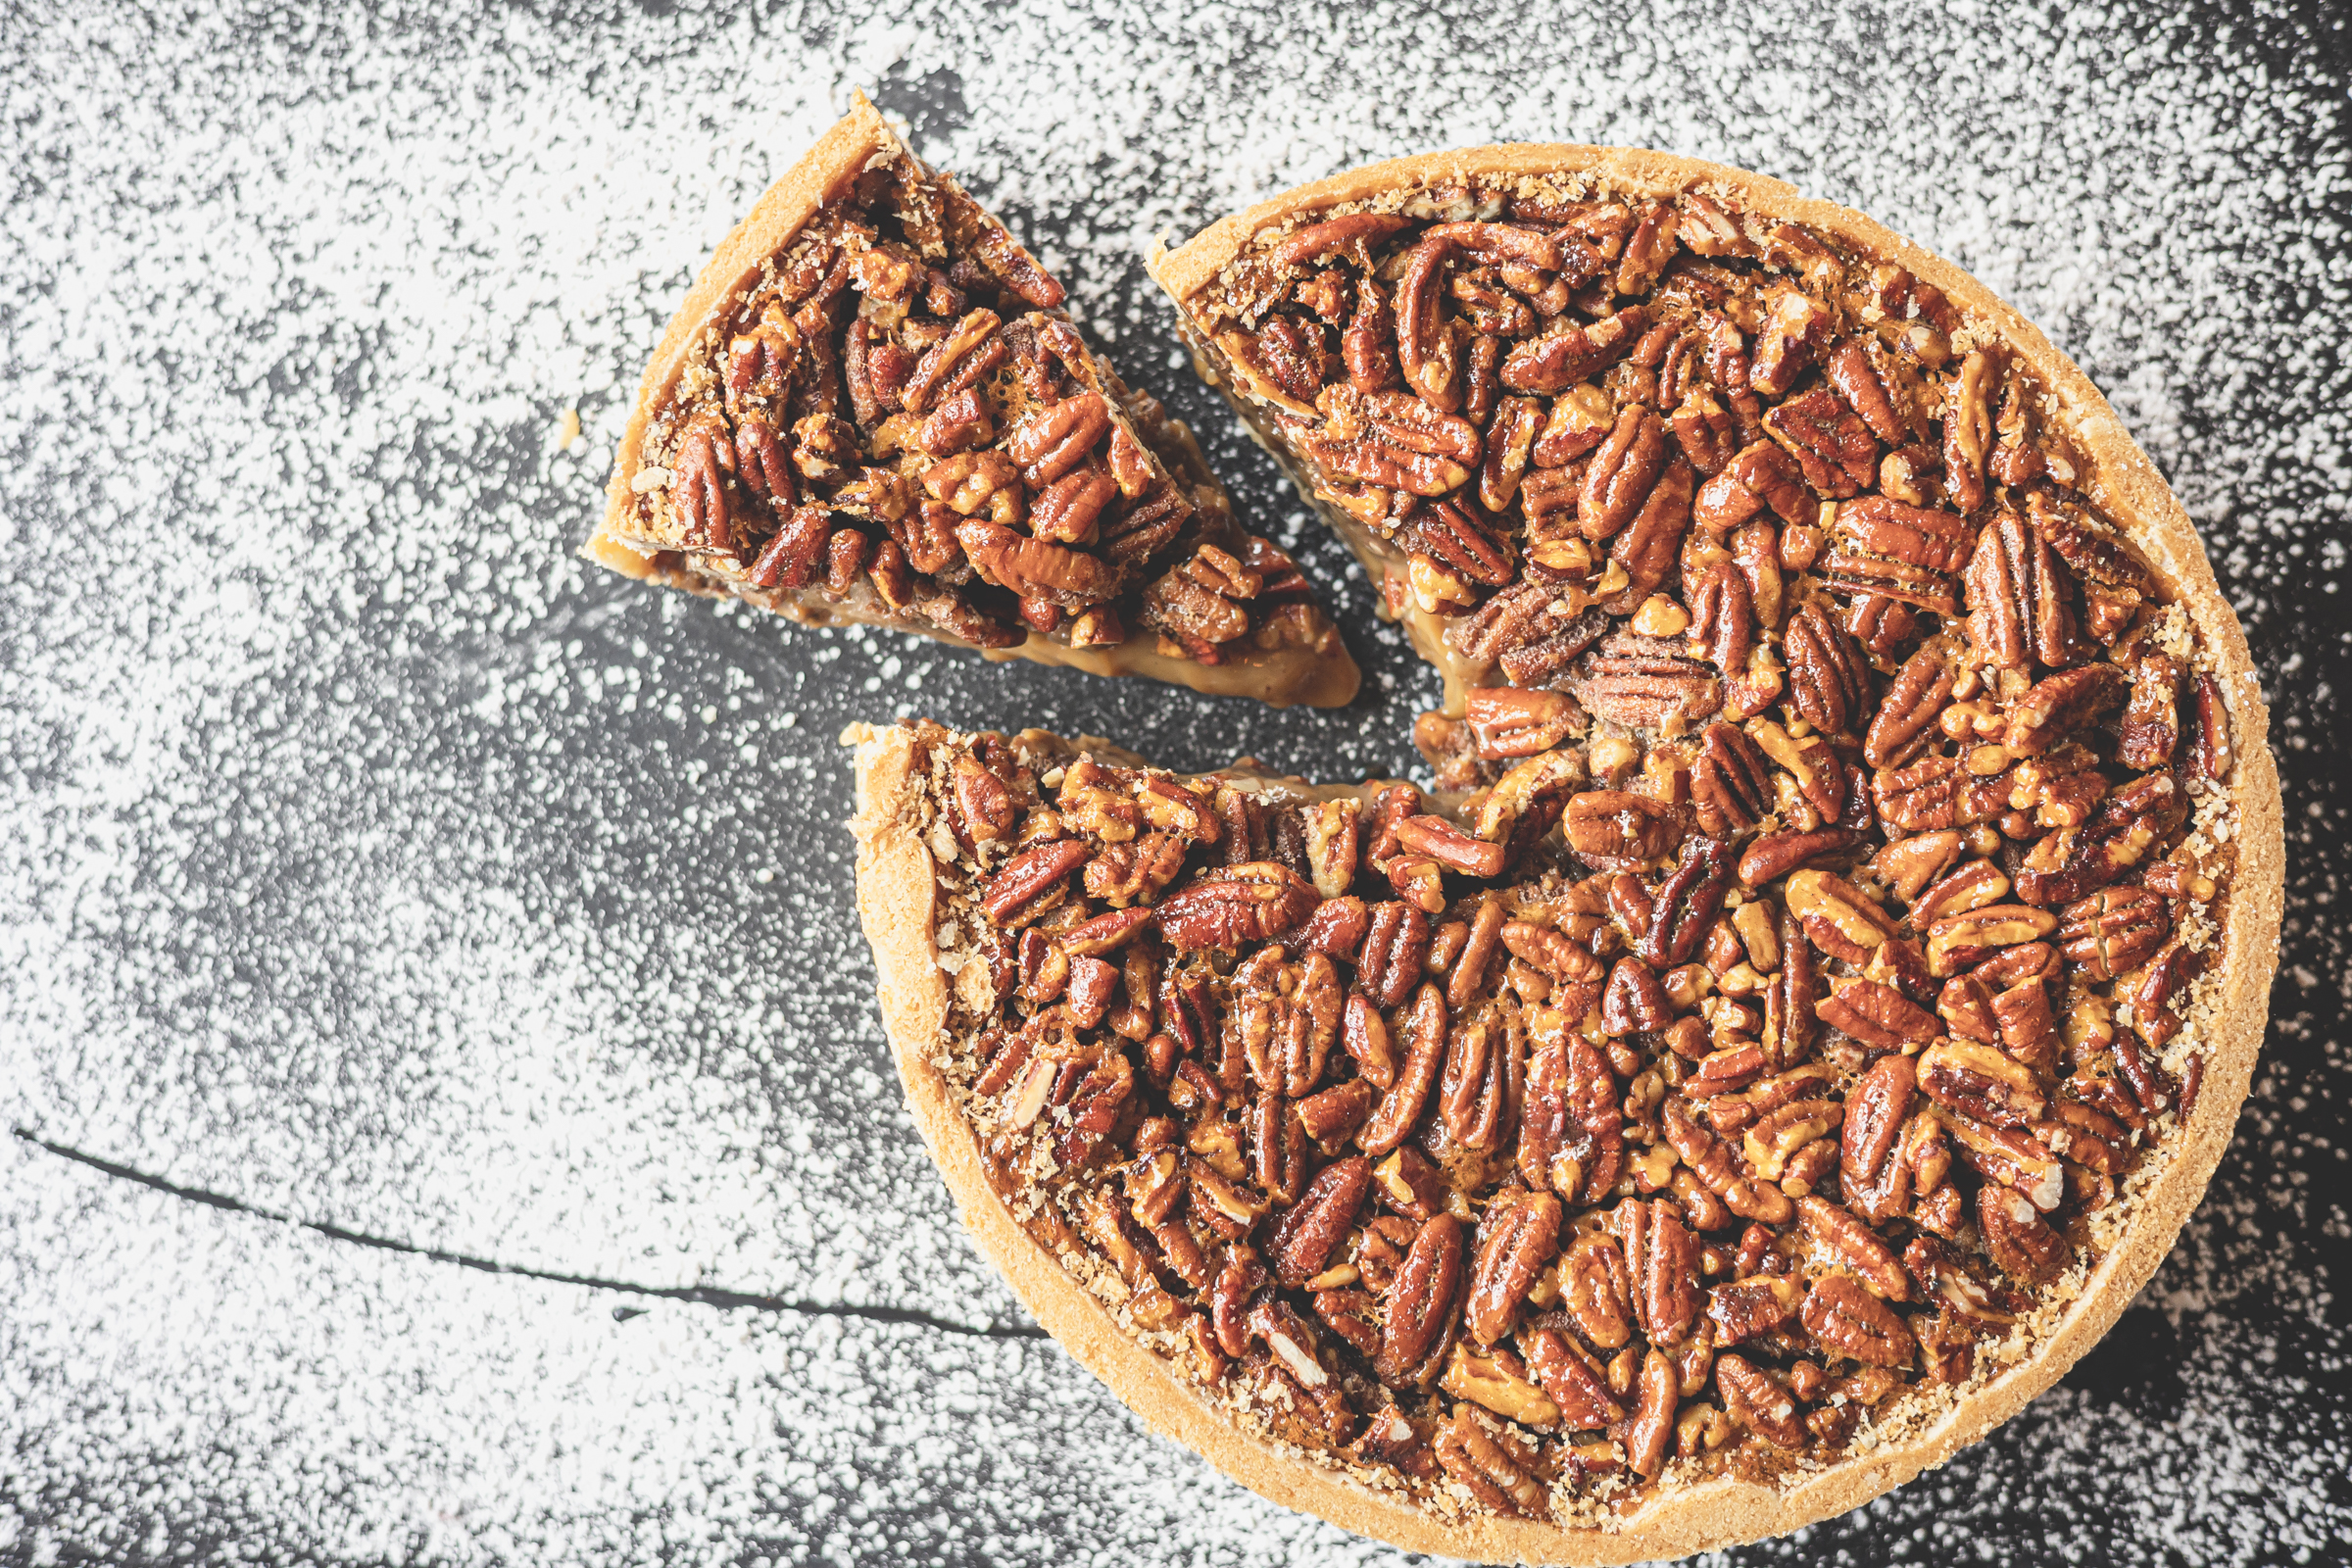 A whole pecan pie with a slice of pie separated, on a table sprinkled with powdered sugar.